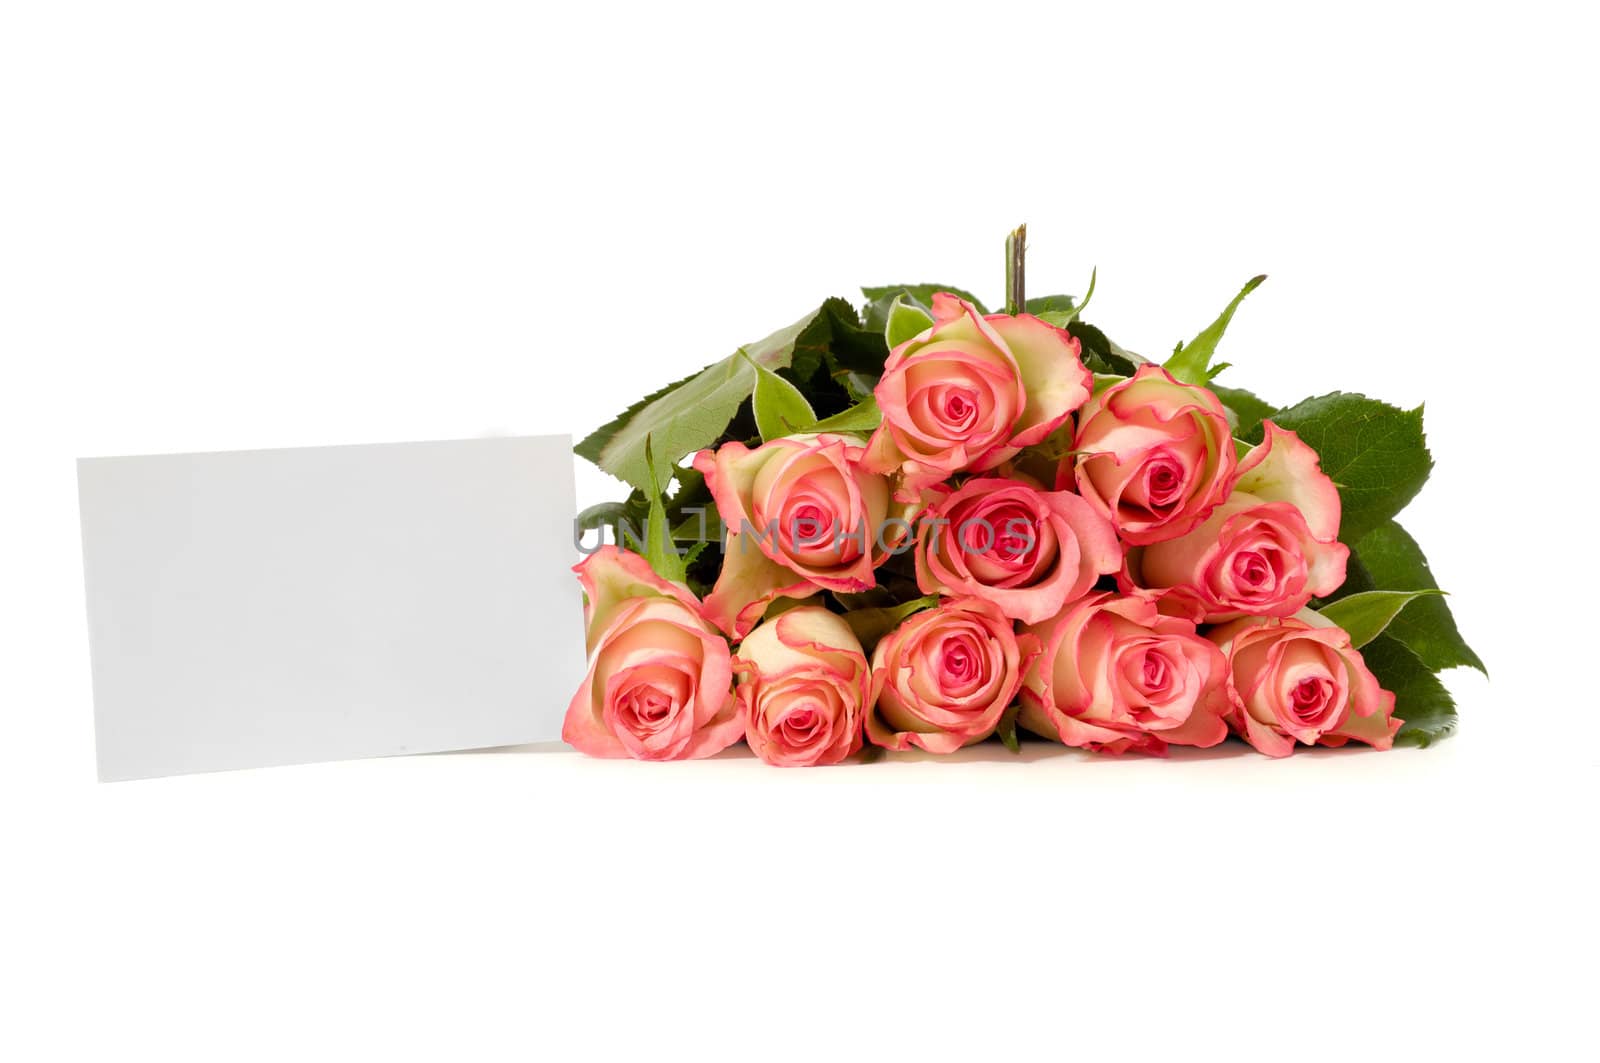 Bouquet of rose flowers with a blank gift card, isolated on white background. Write your own message.